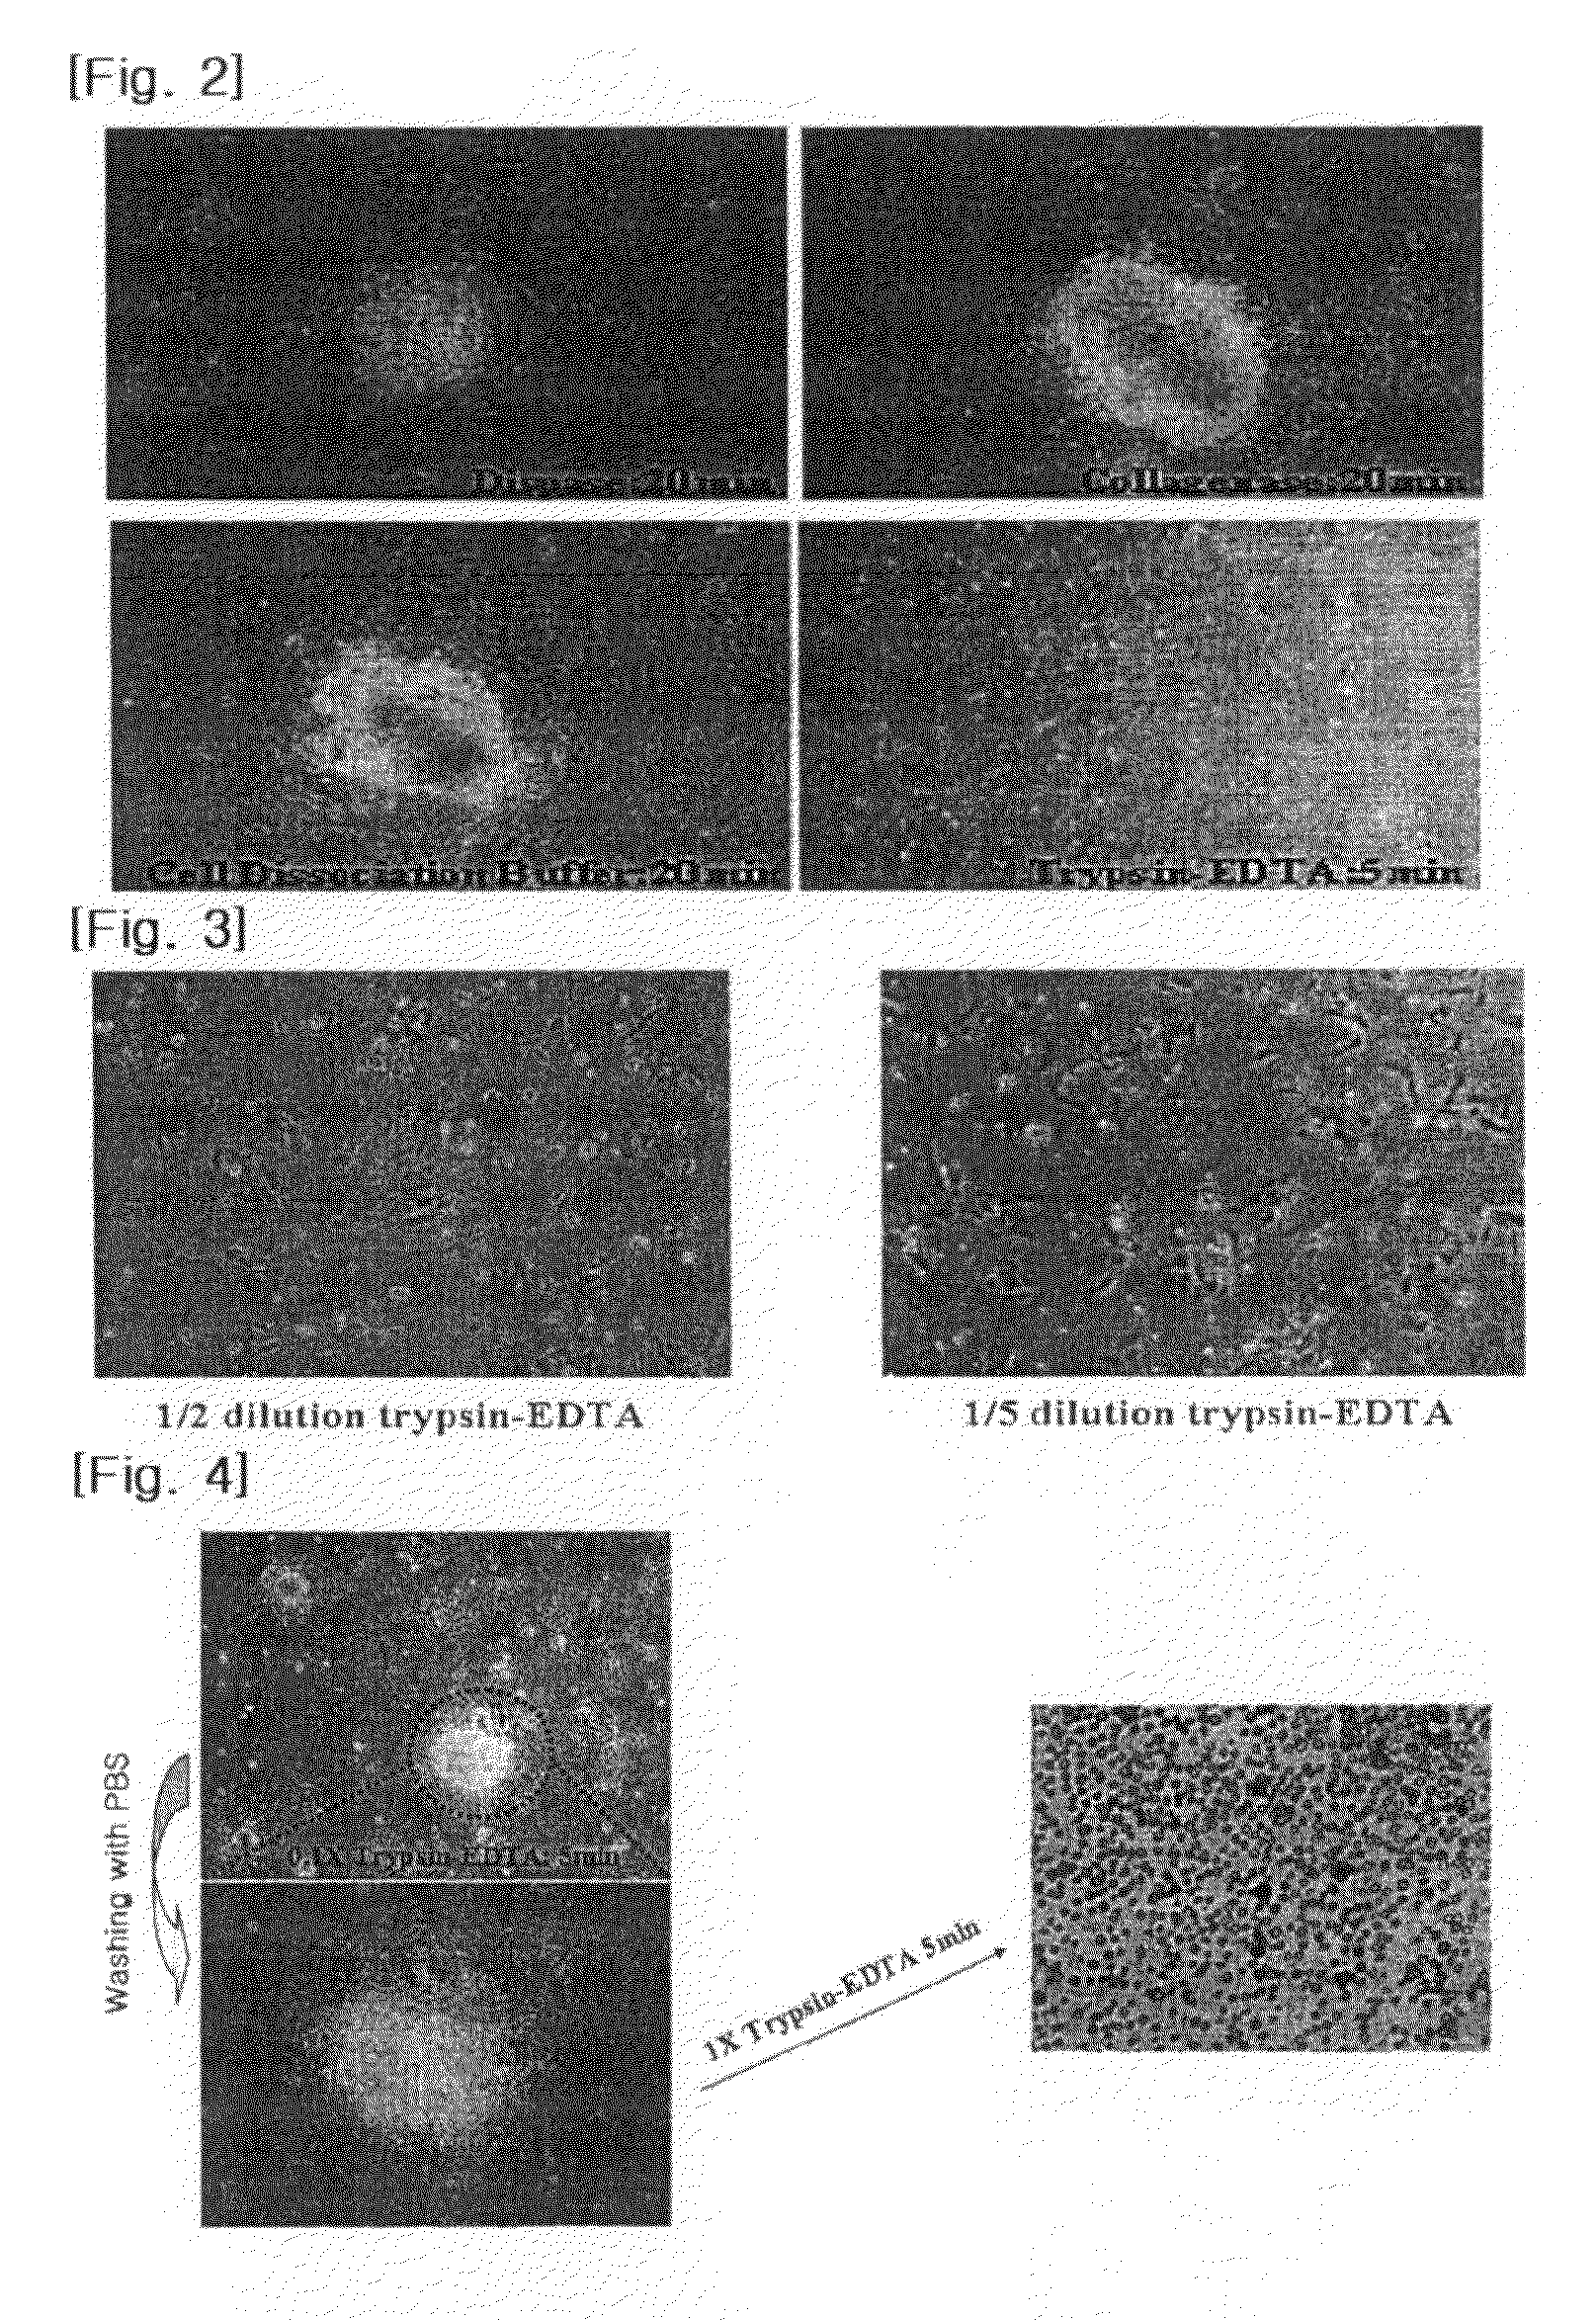 Process for isolating vascular endothelial cells from embryoid bodies differentiated from embryonc stem cells